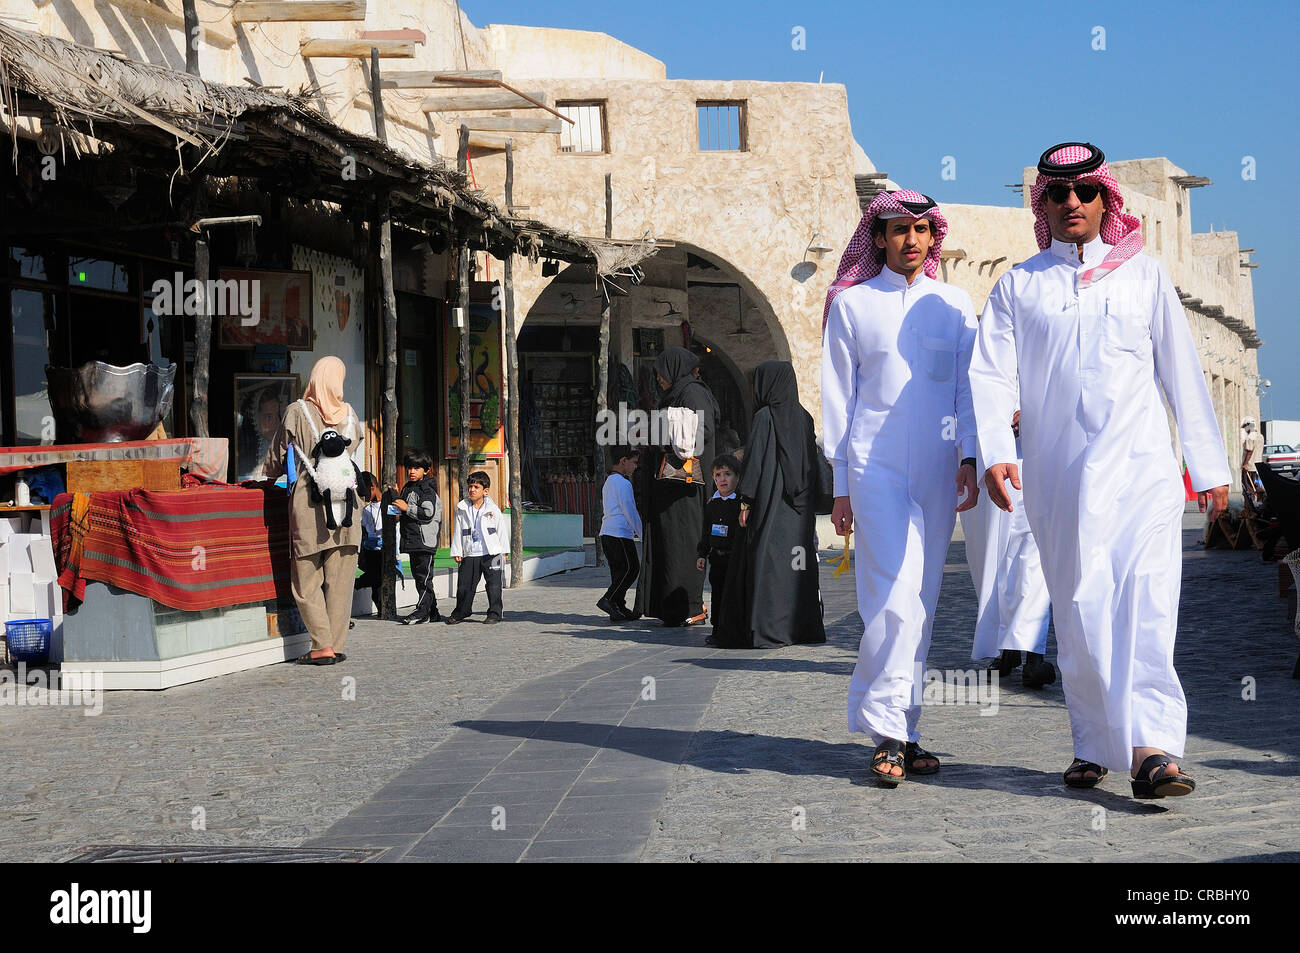 Typical clothing in Souq Waqif, Doha, Qatar, Middle East Stock Photo